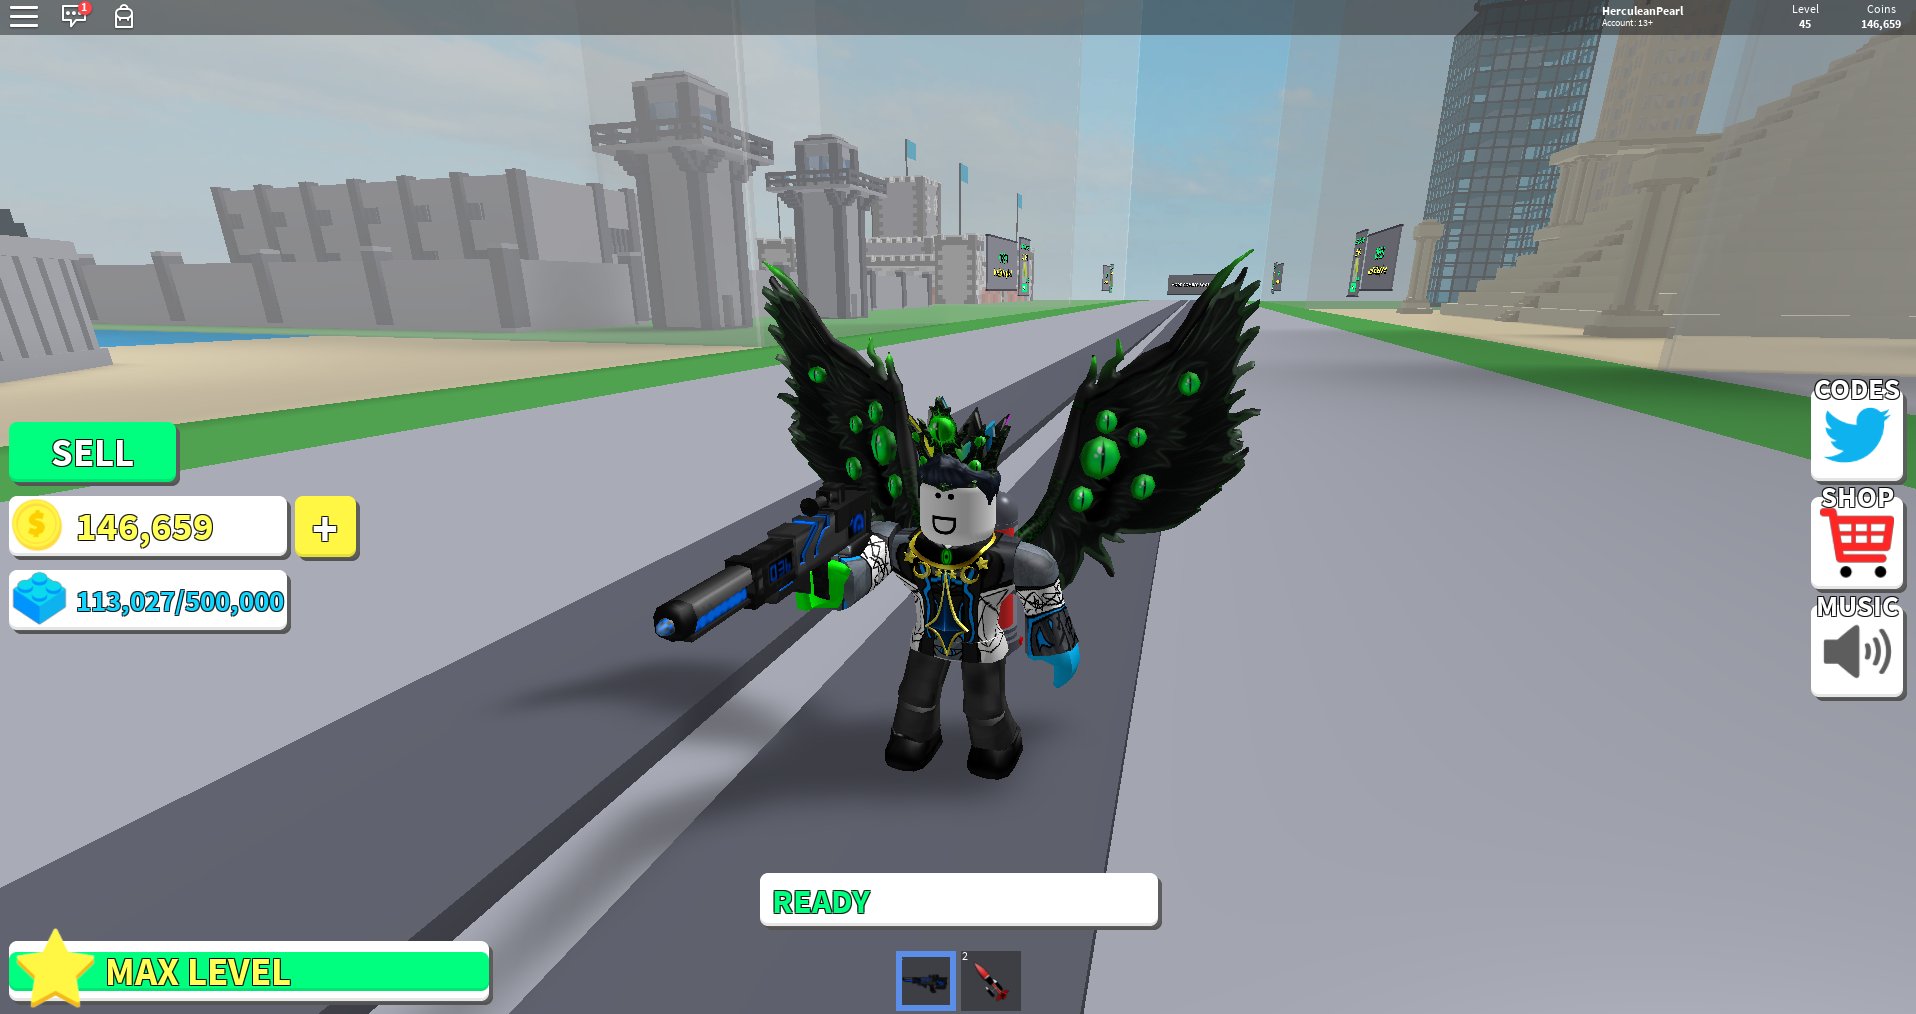 Herculeanpearl On Twitter One Of The First Few To Get All Of The Weapons Along With Max Level For The Earliest Version Of Destruction Simulator On Roblox D Https T Co Pk34oju5ko - roblox destined ascension codes